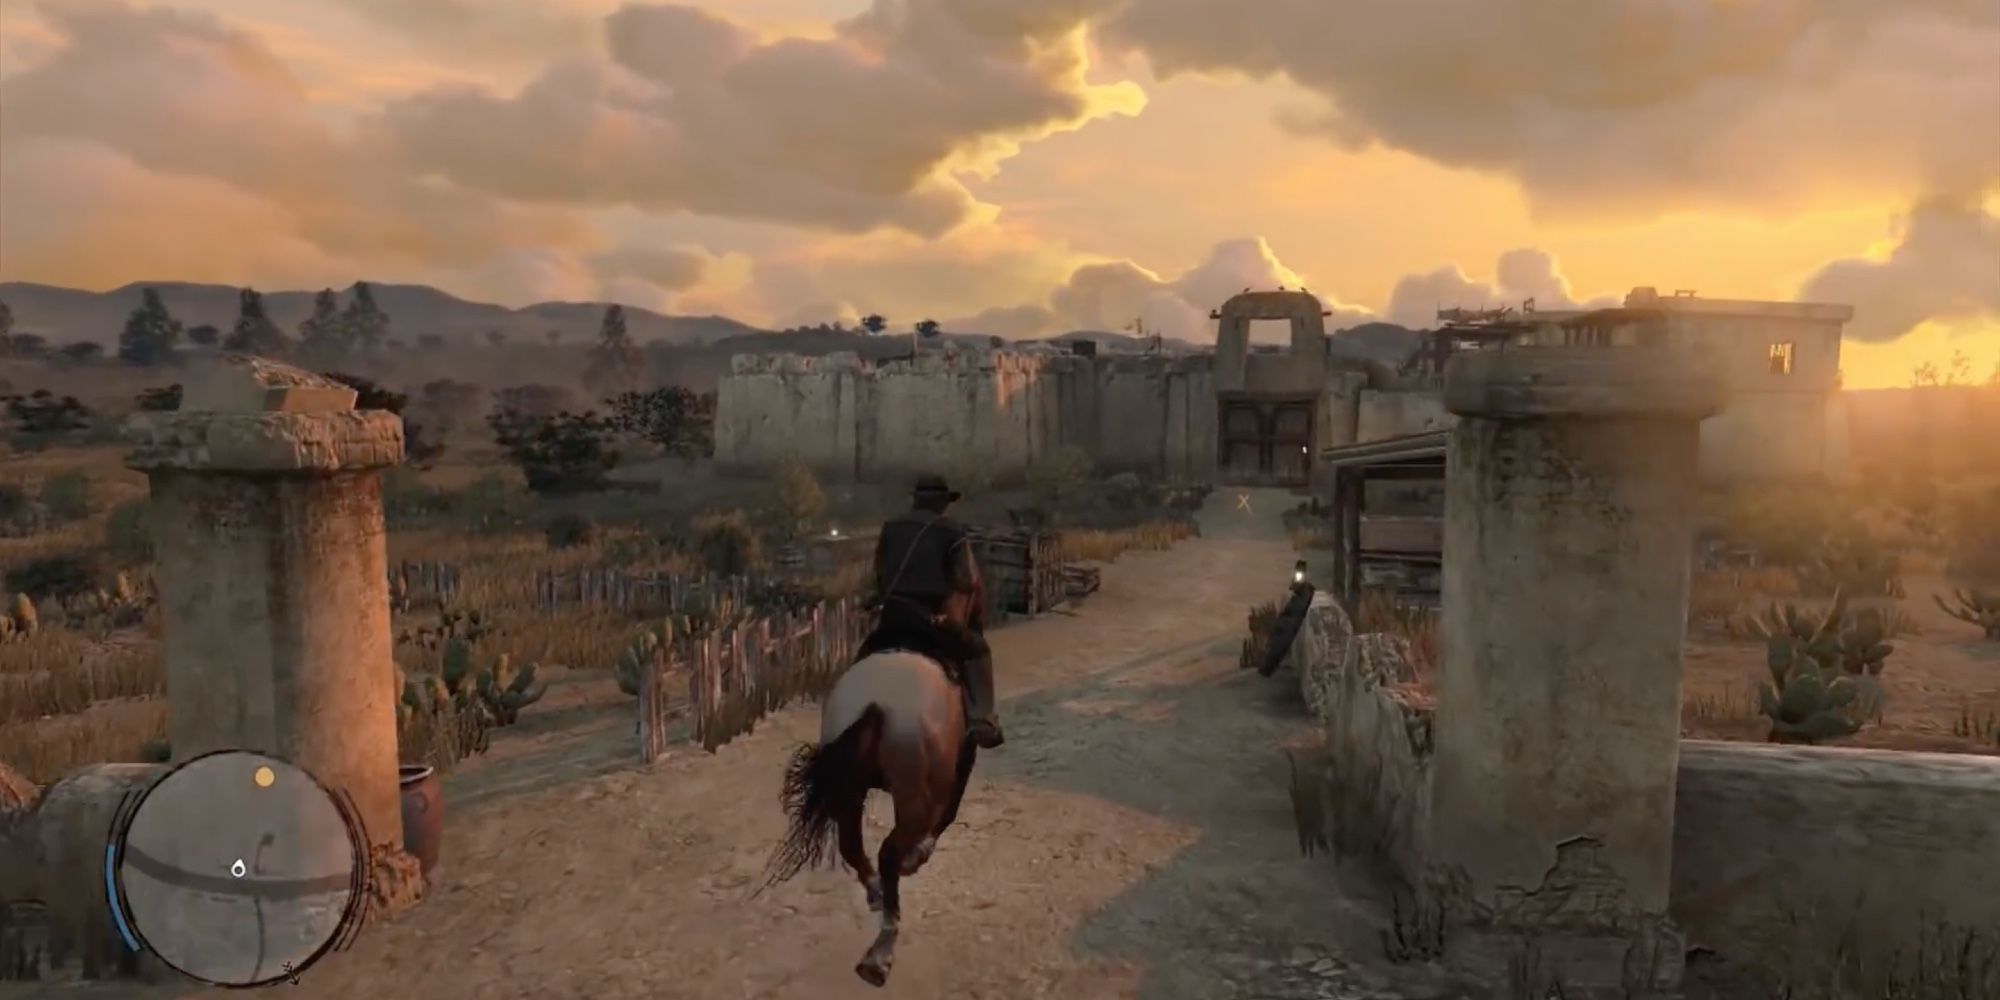 Best Years in Gaming - 2010 - Red Dead Redemption - Player rides into a horse